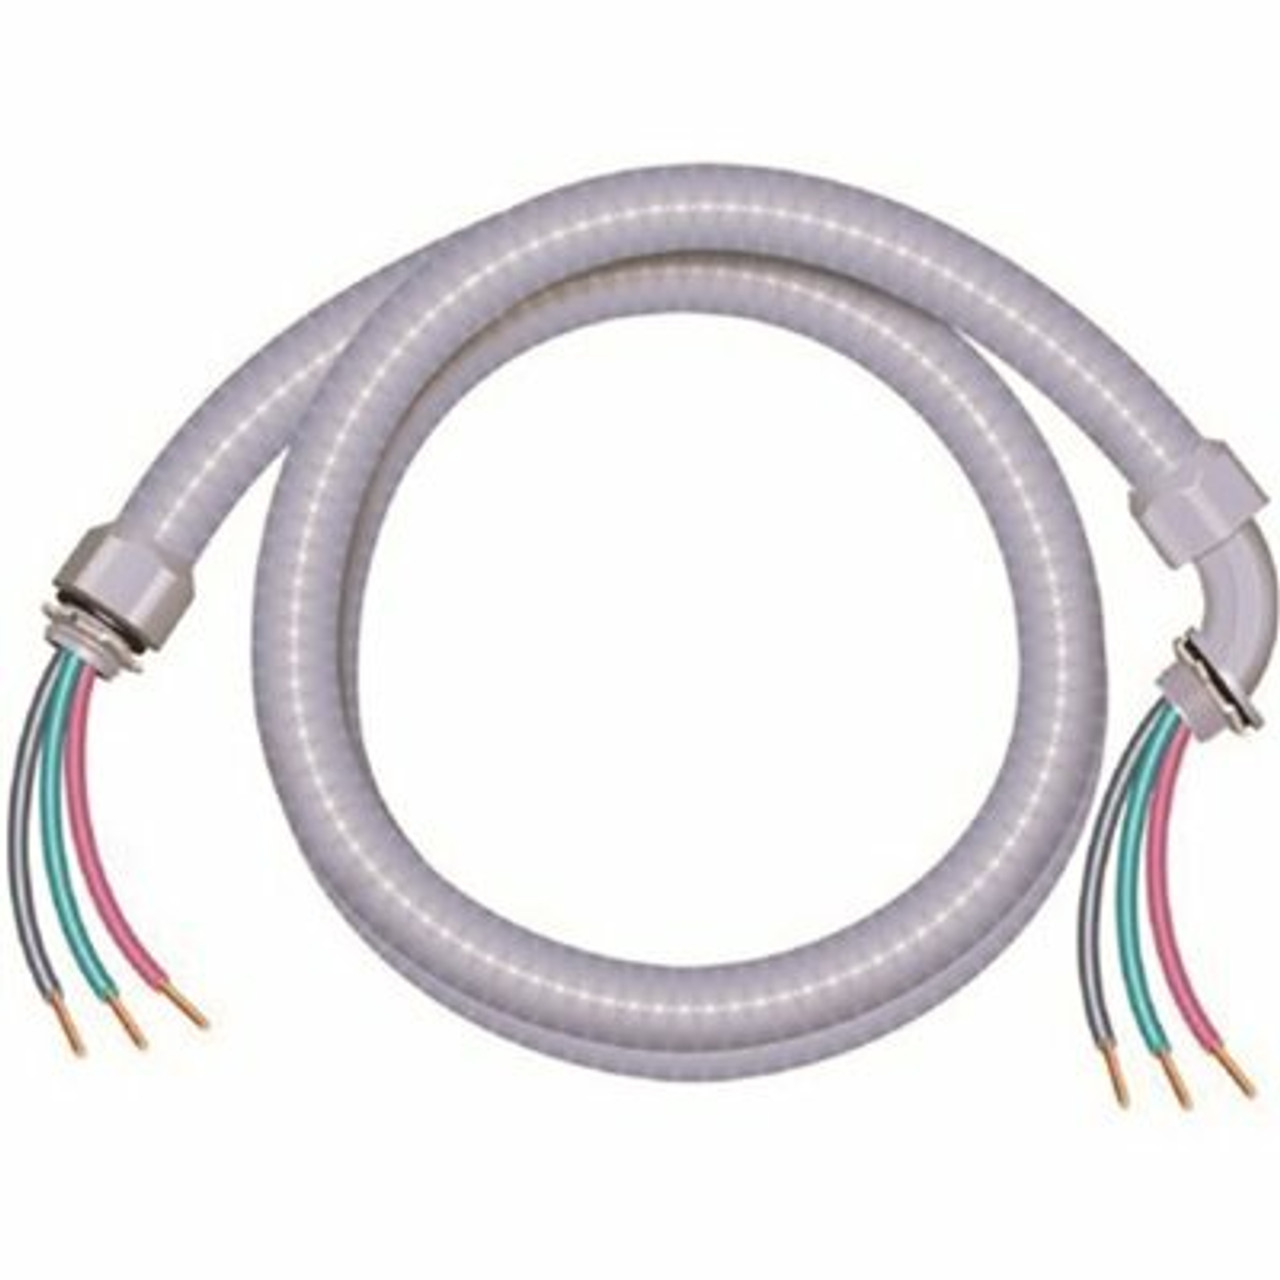 Southwire 3/4 In. X 6 Ft. 8/2 Ultra-Whip Liquidtight Flexible Non-Metallic Pvc Conduit Cable Whip